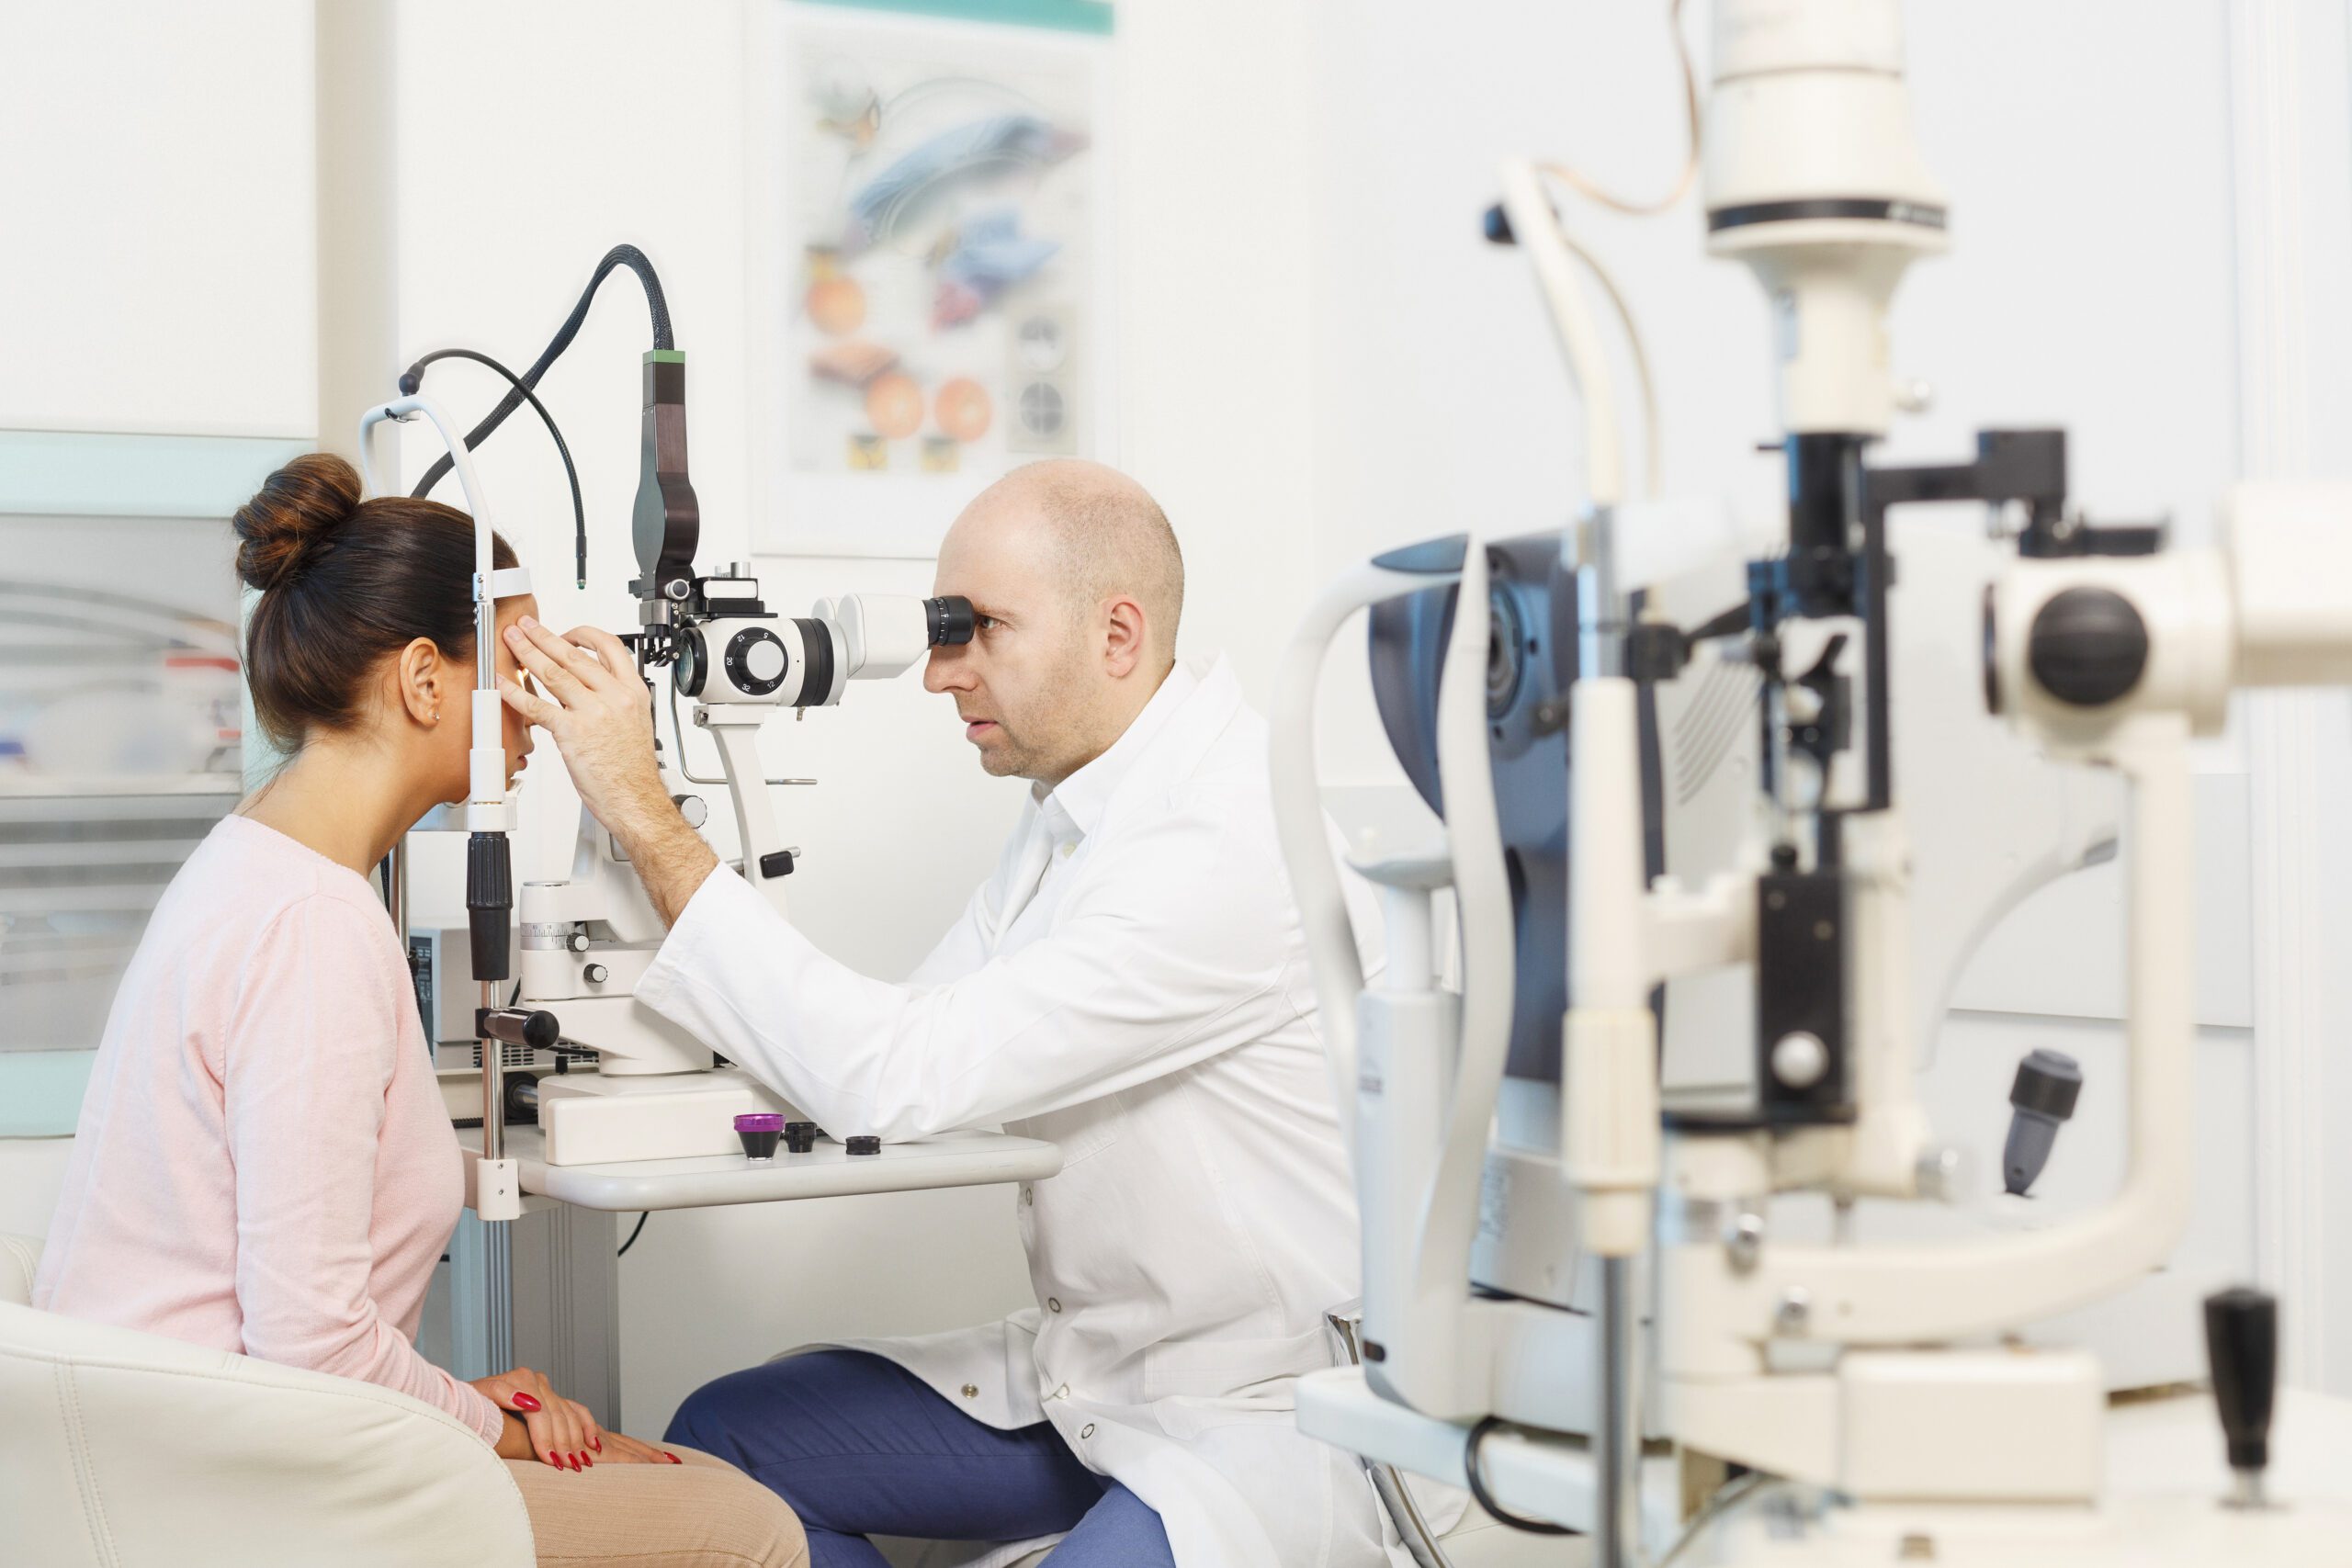 at-the-optician-ophthalmology-doctor-ophthalmologist-optometrist-medical-eye-examination